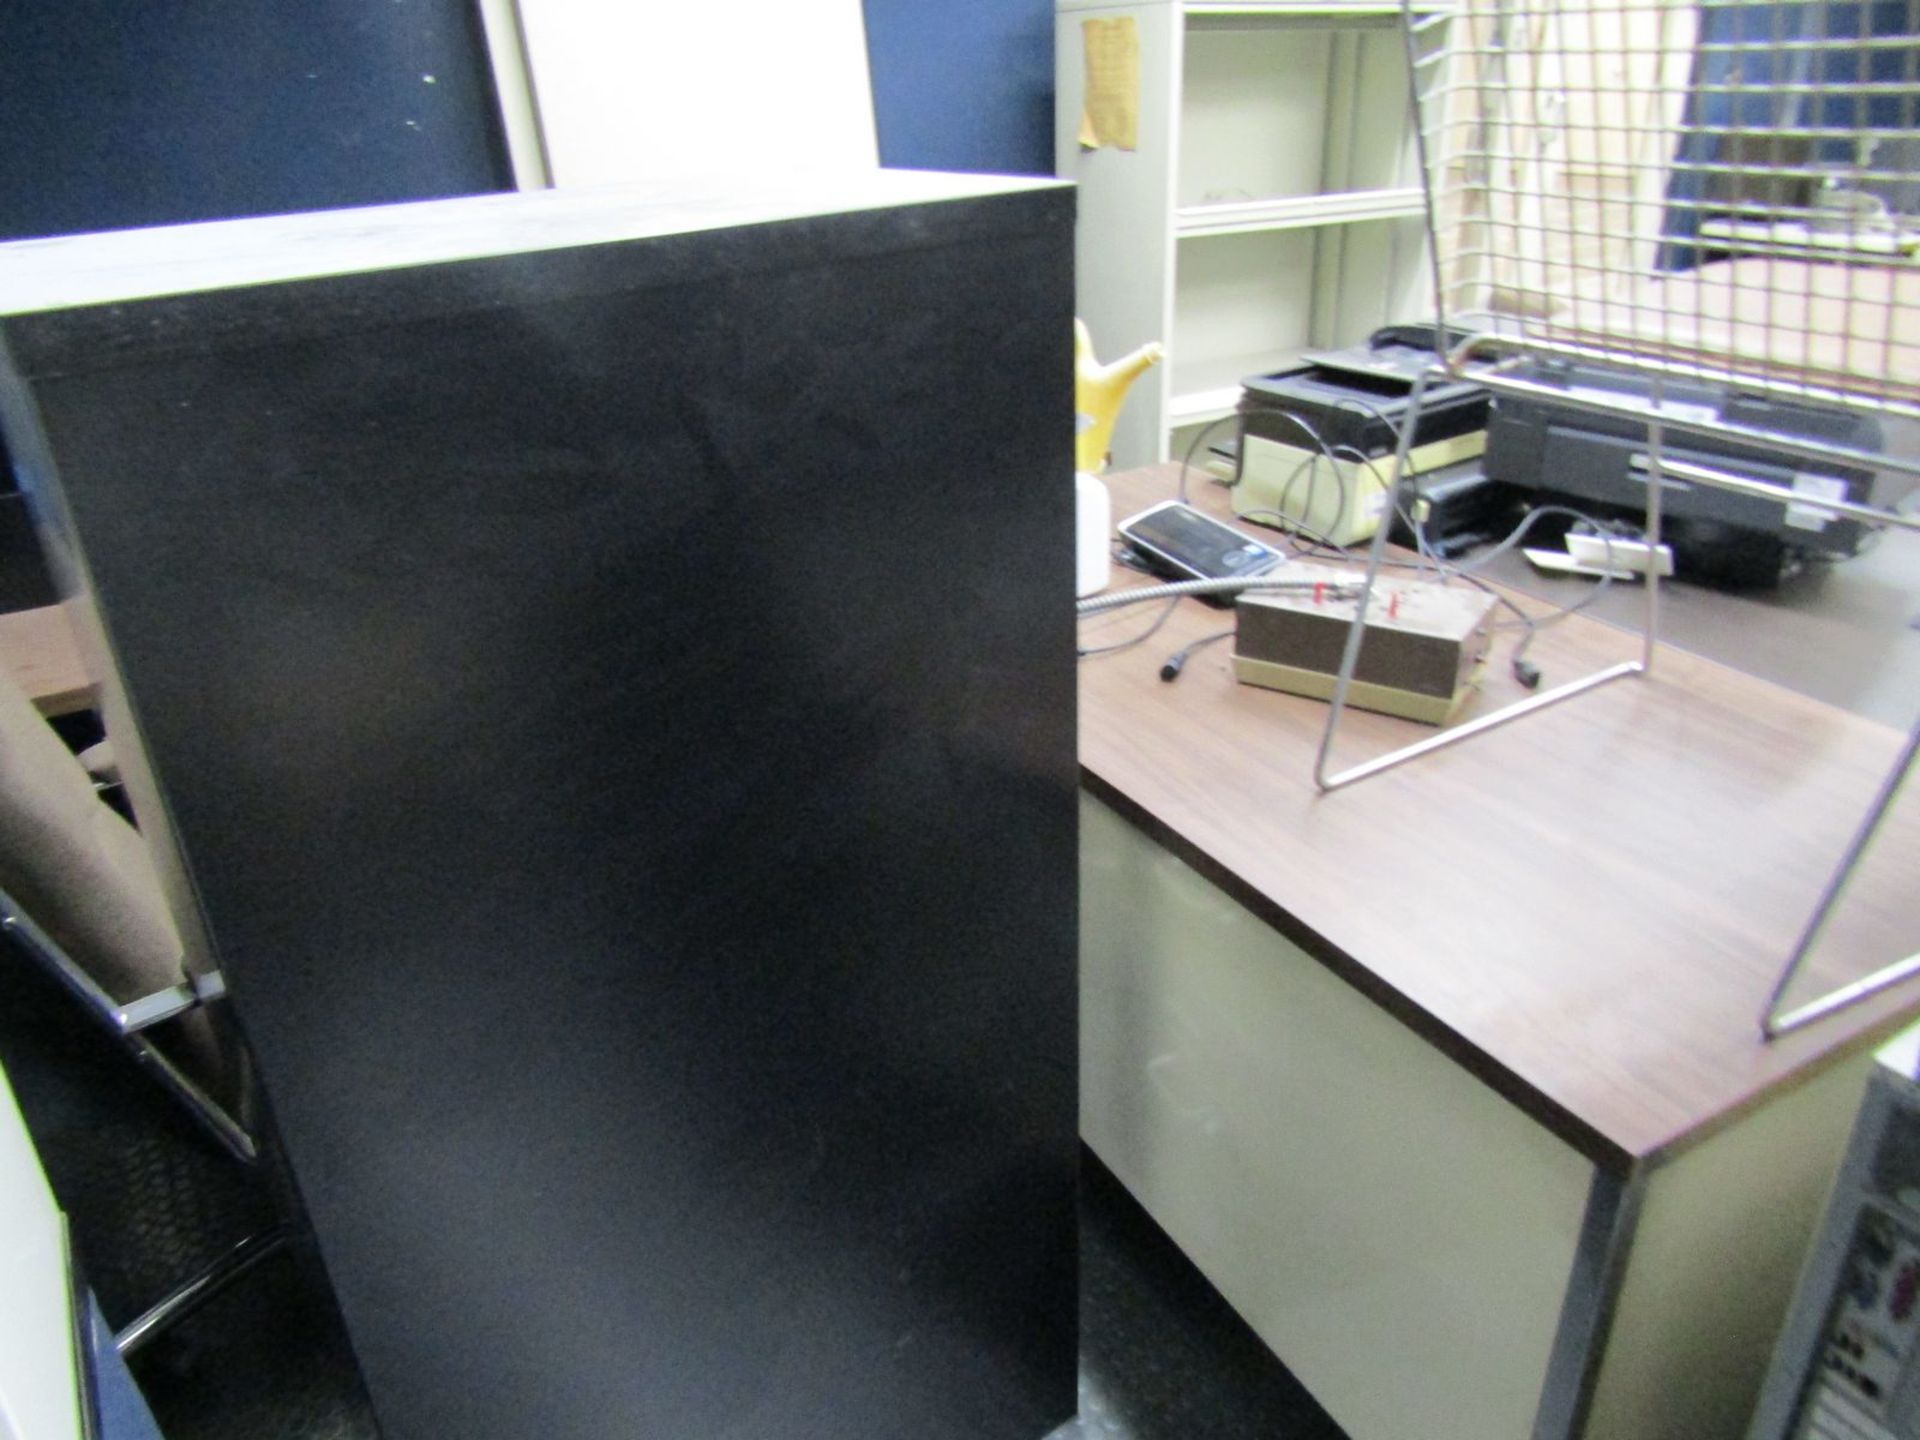 Lot - Remaining Contents of IT Room, to Include: Desks, Chairs, Filing Cabinets, Shelving Units, - Image 9 of 10